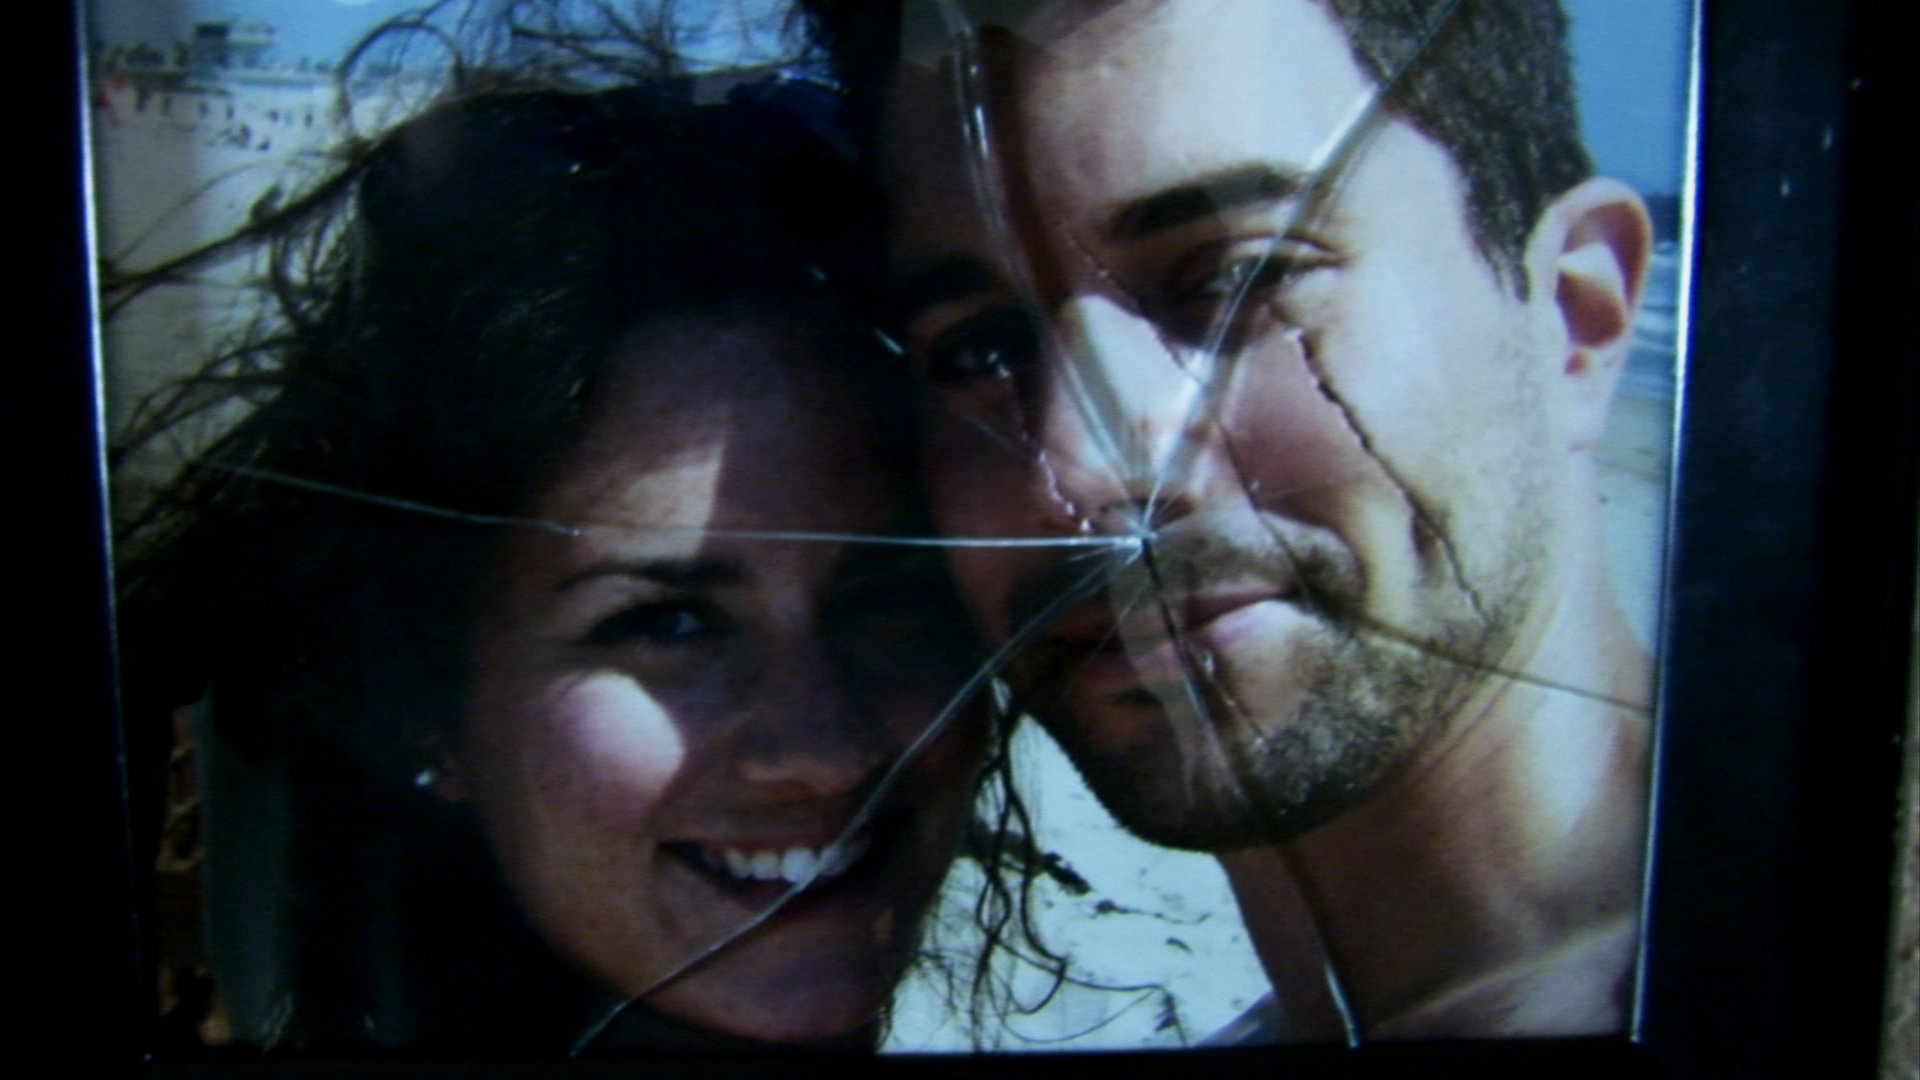 'Paranormal Activity' Katie Featherston and Micah Sloat, who inspired the sequels. A picture of them smiling with the glass shattered and a scratch over Micah's face in the picture.